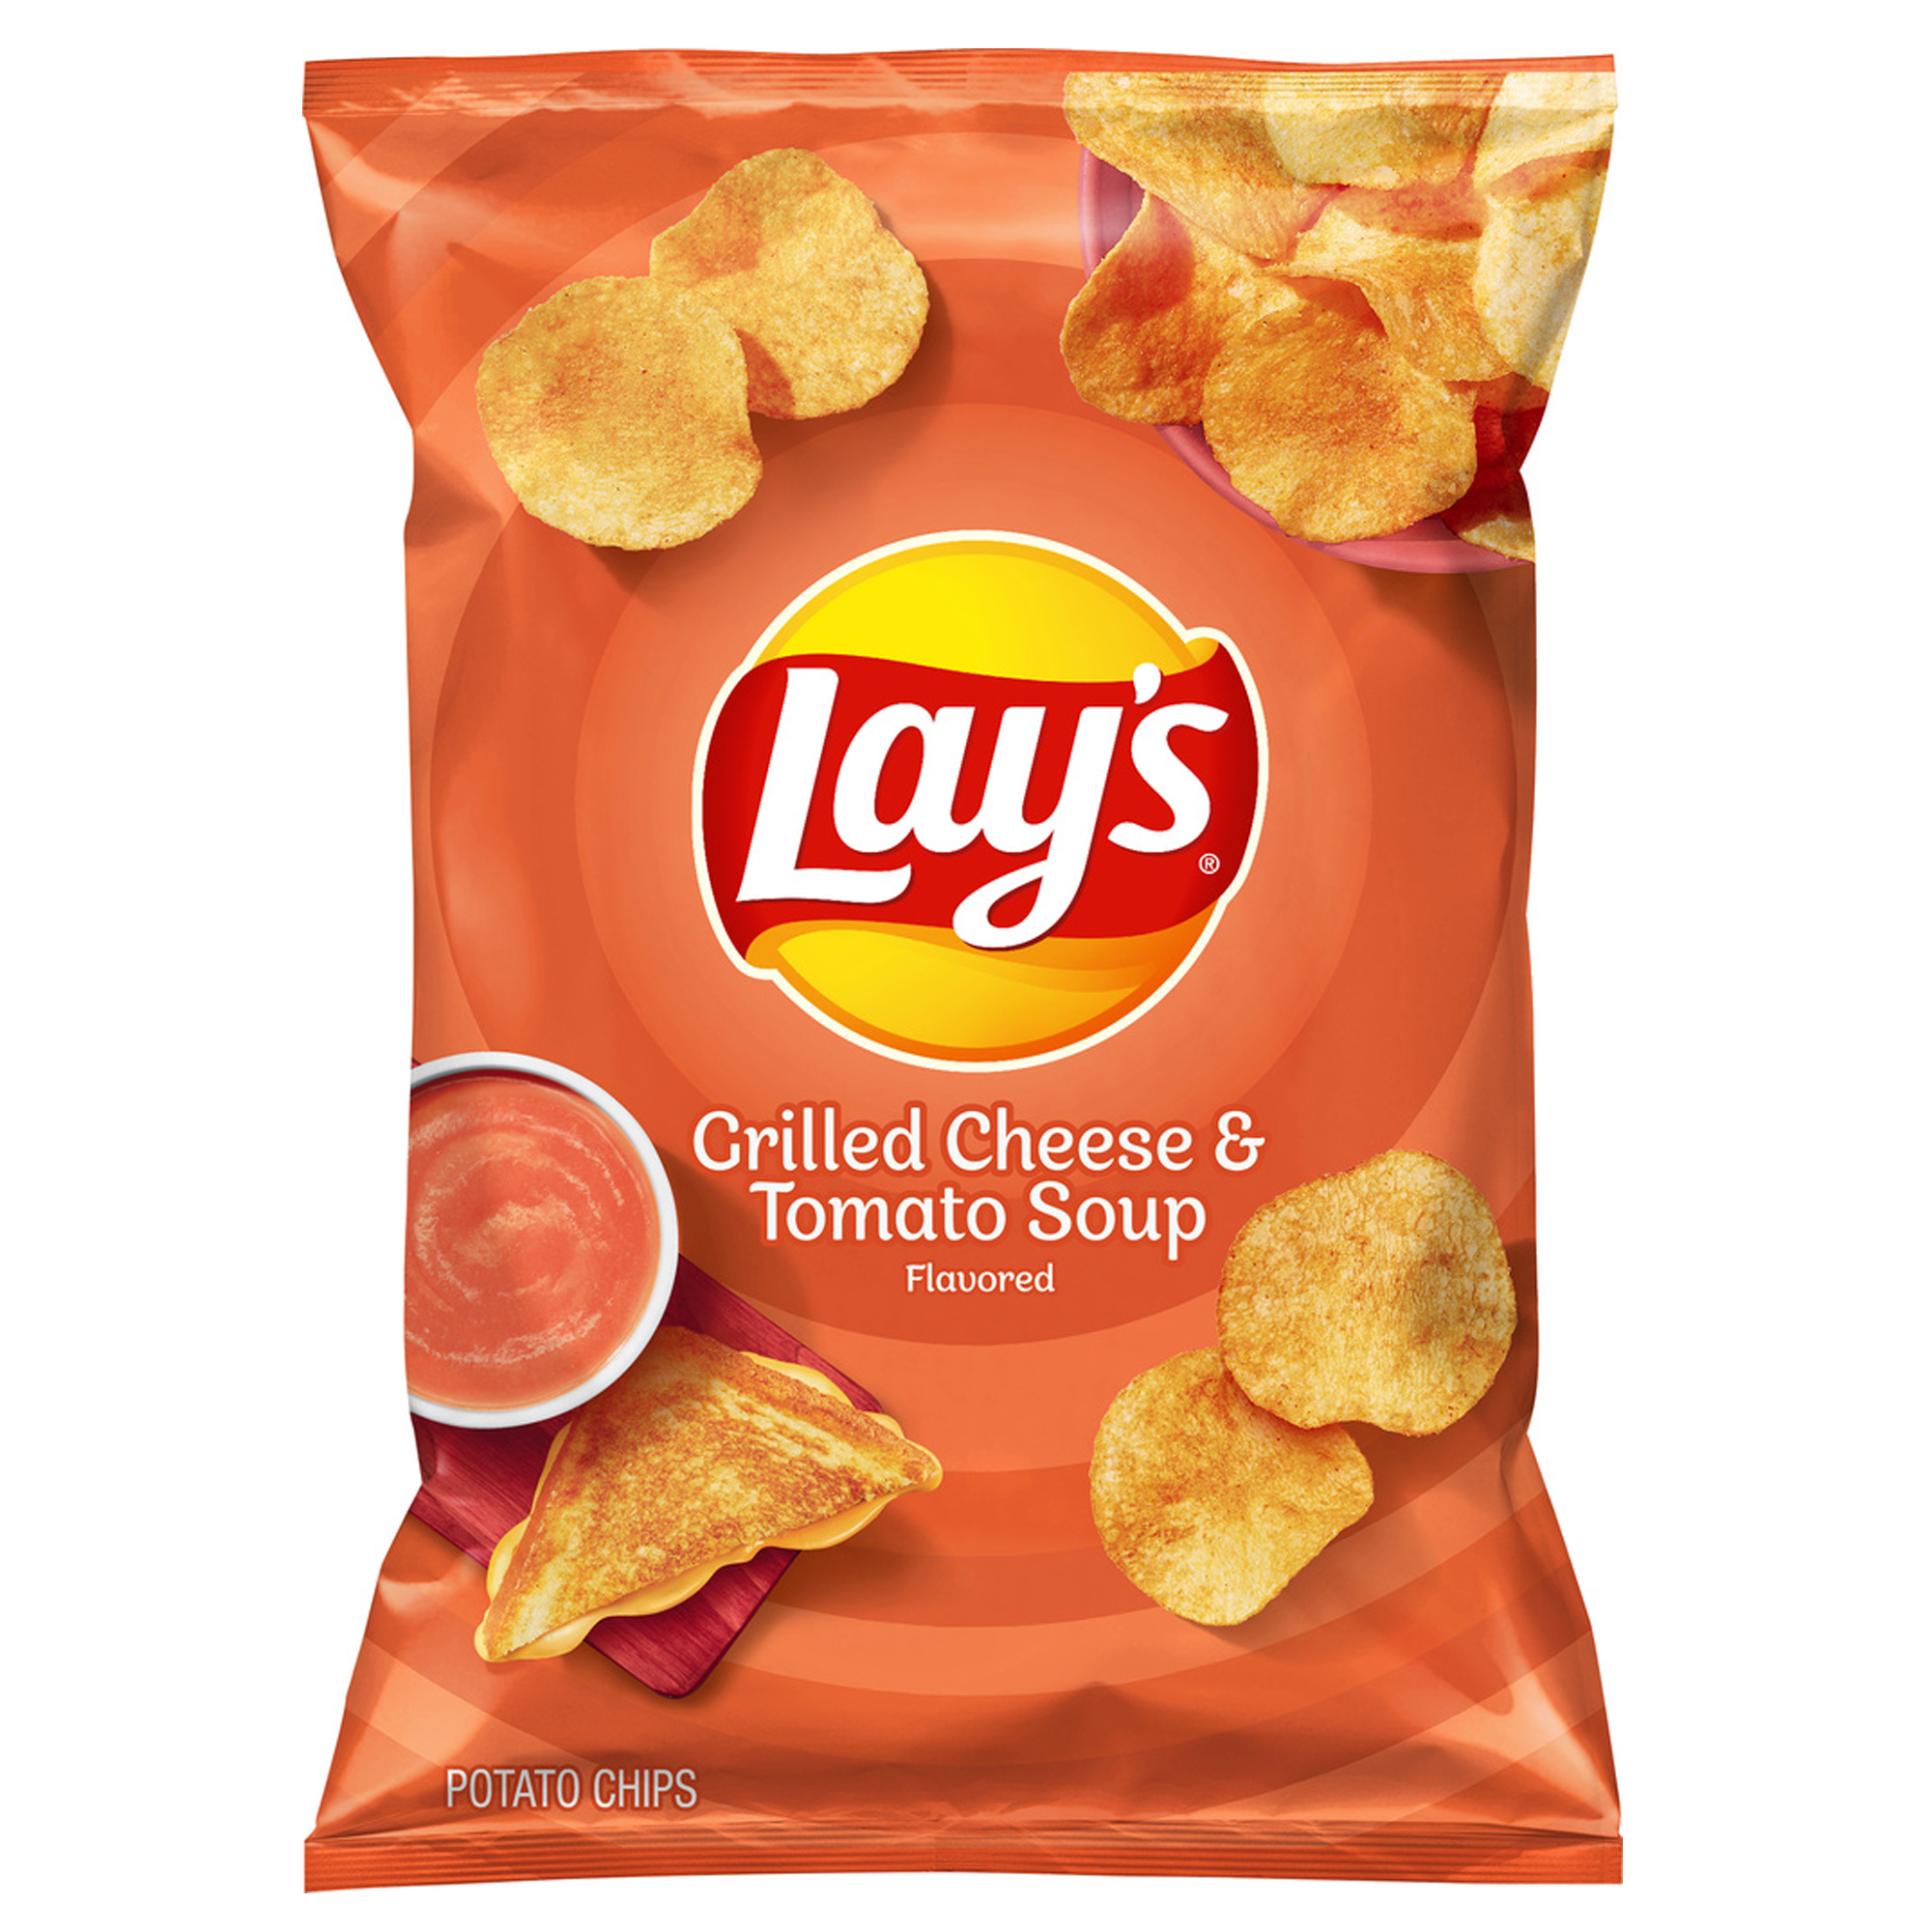 Lays-Launches-Grilled-Cheese-and-Tomato-Soup-Flavored-Potato-Chips.jpg